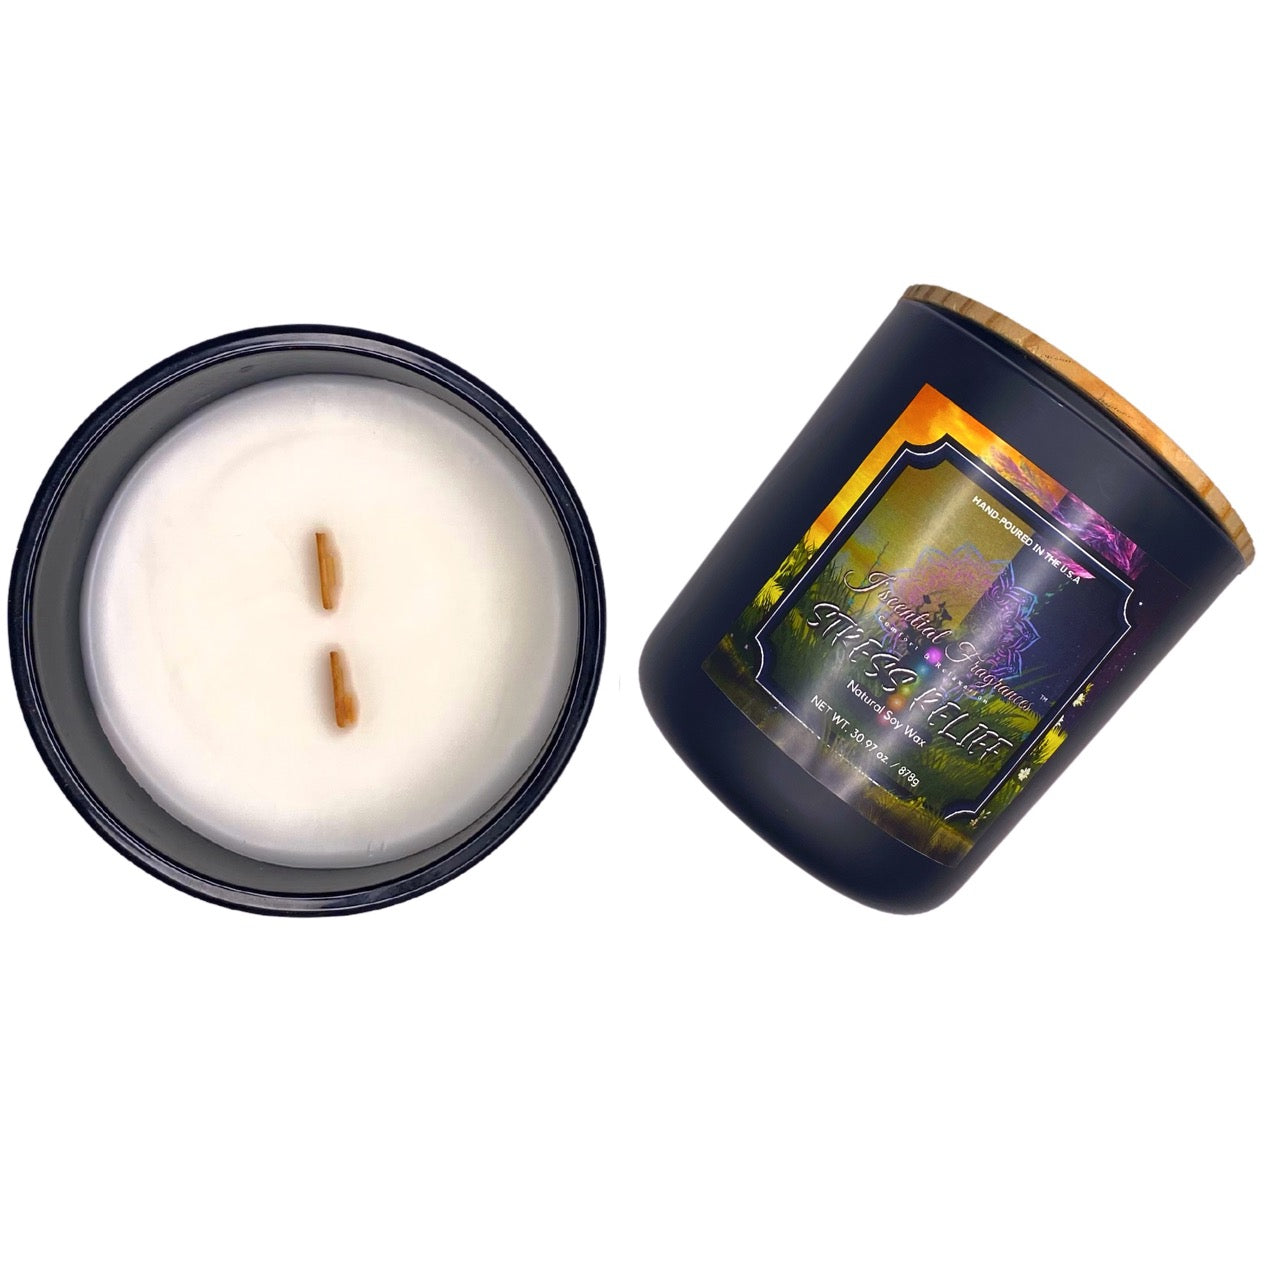 Stress Relief (12oz. Candle)